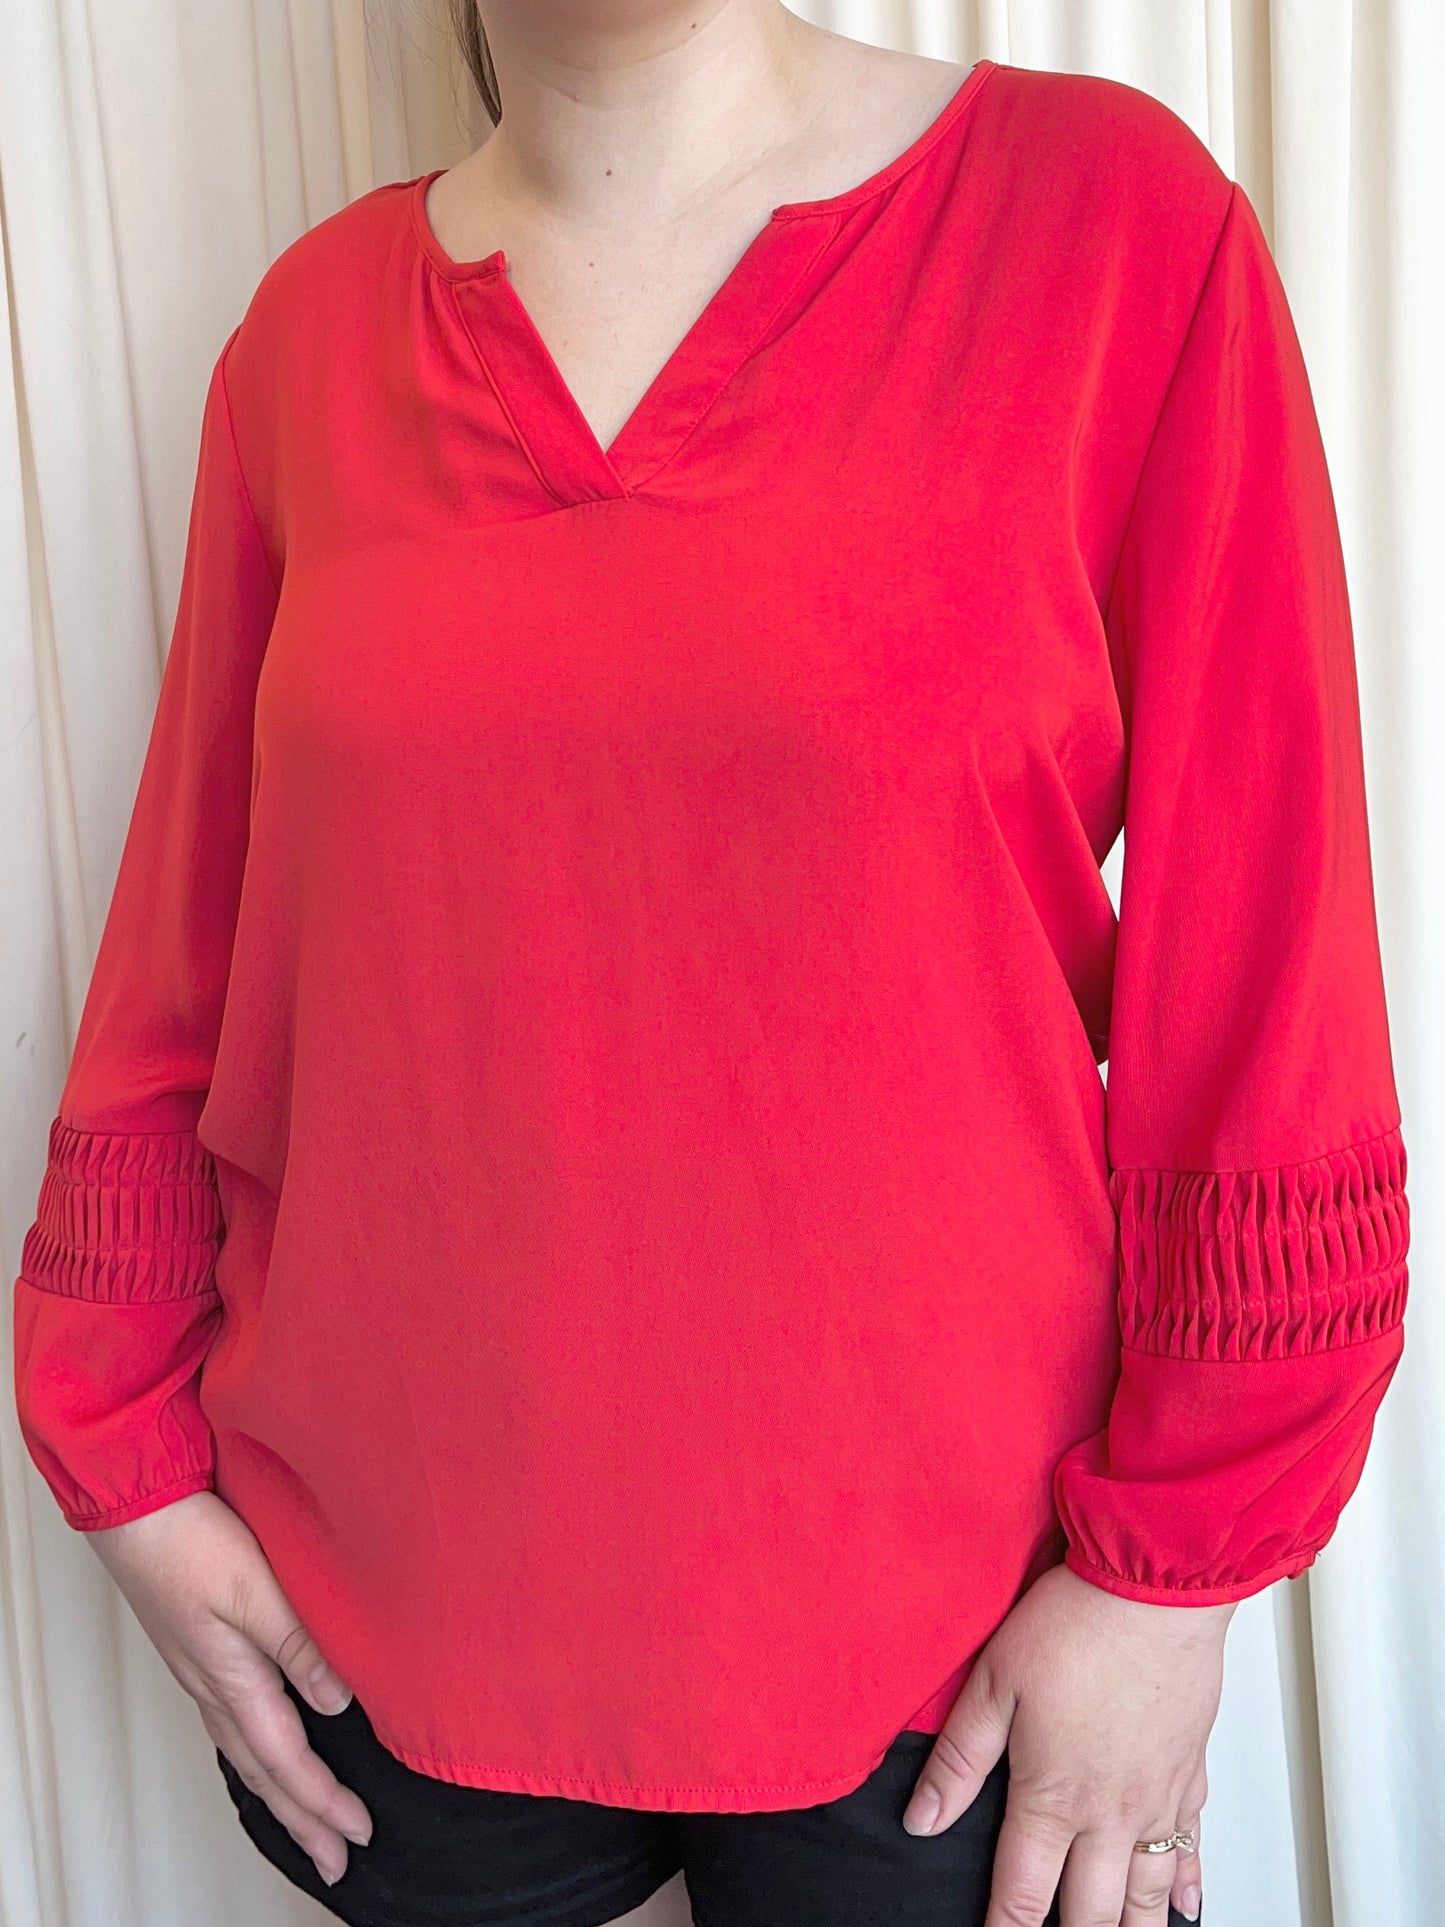 Flowy Red Blouse - Large